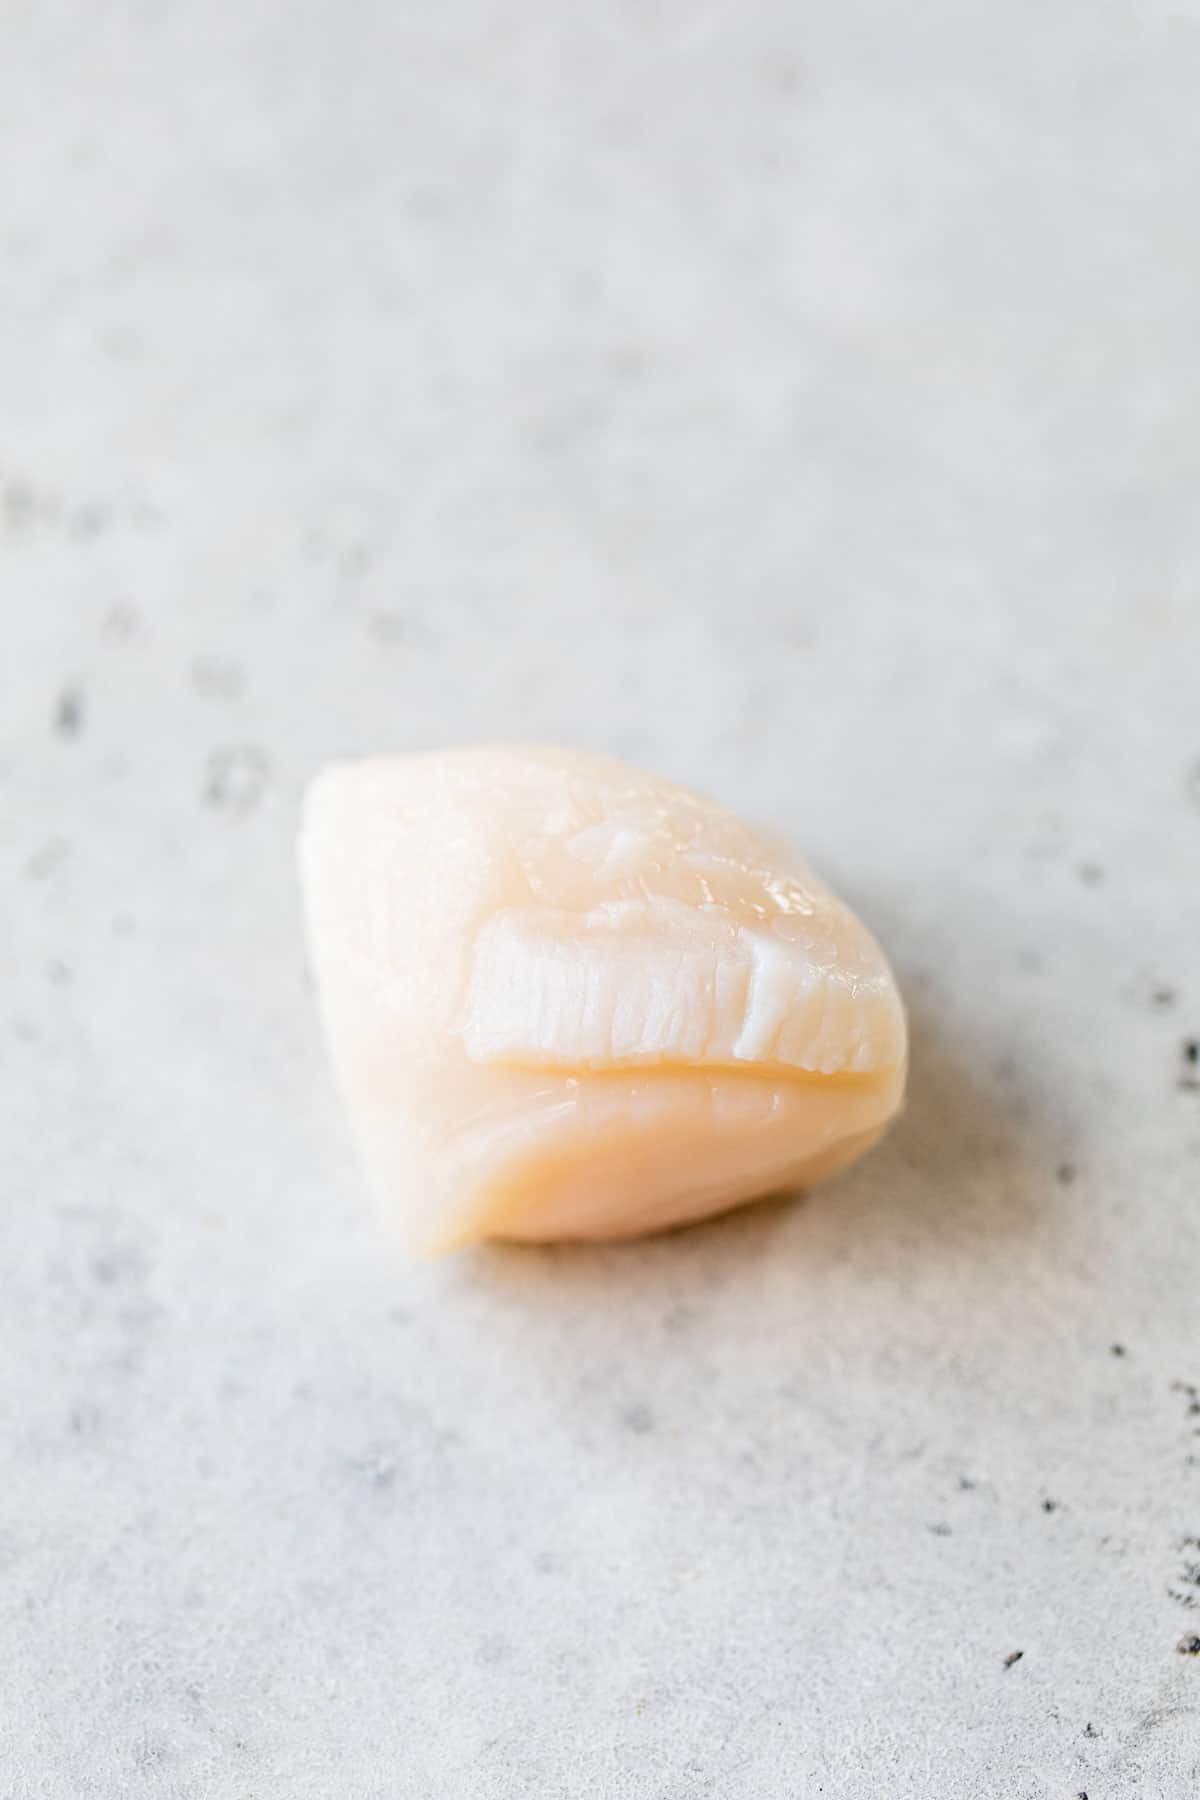 raw scallop on a table